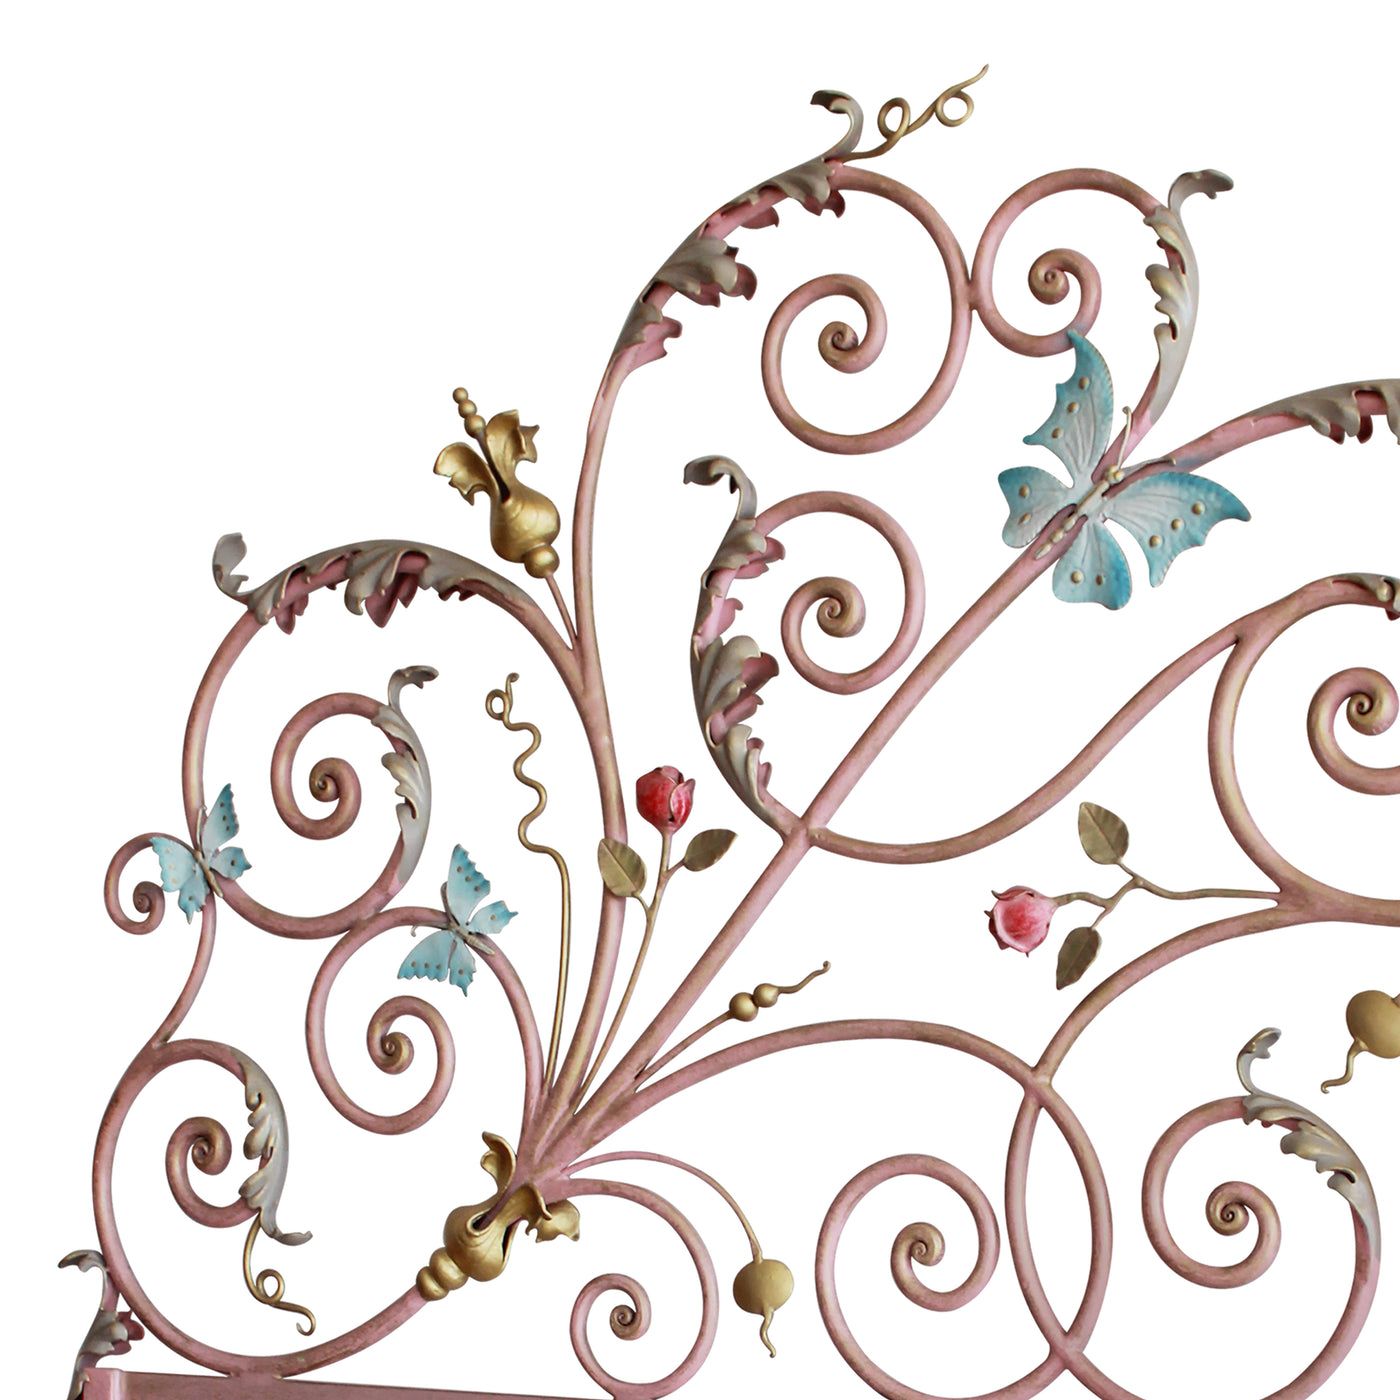 Close up of a unique wrought iron headboard for a girly bed with pink scrolls, blue butterflies and red roses